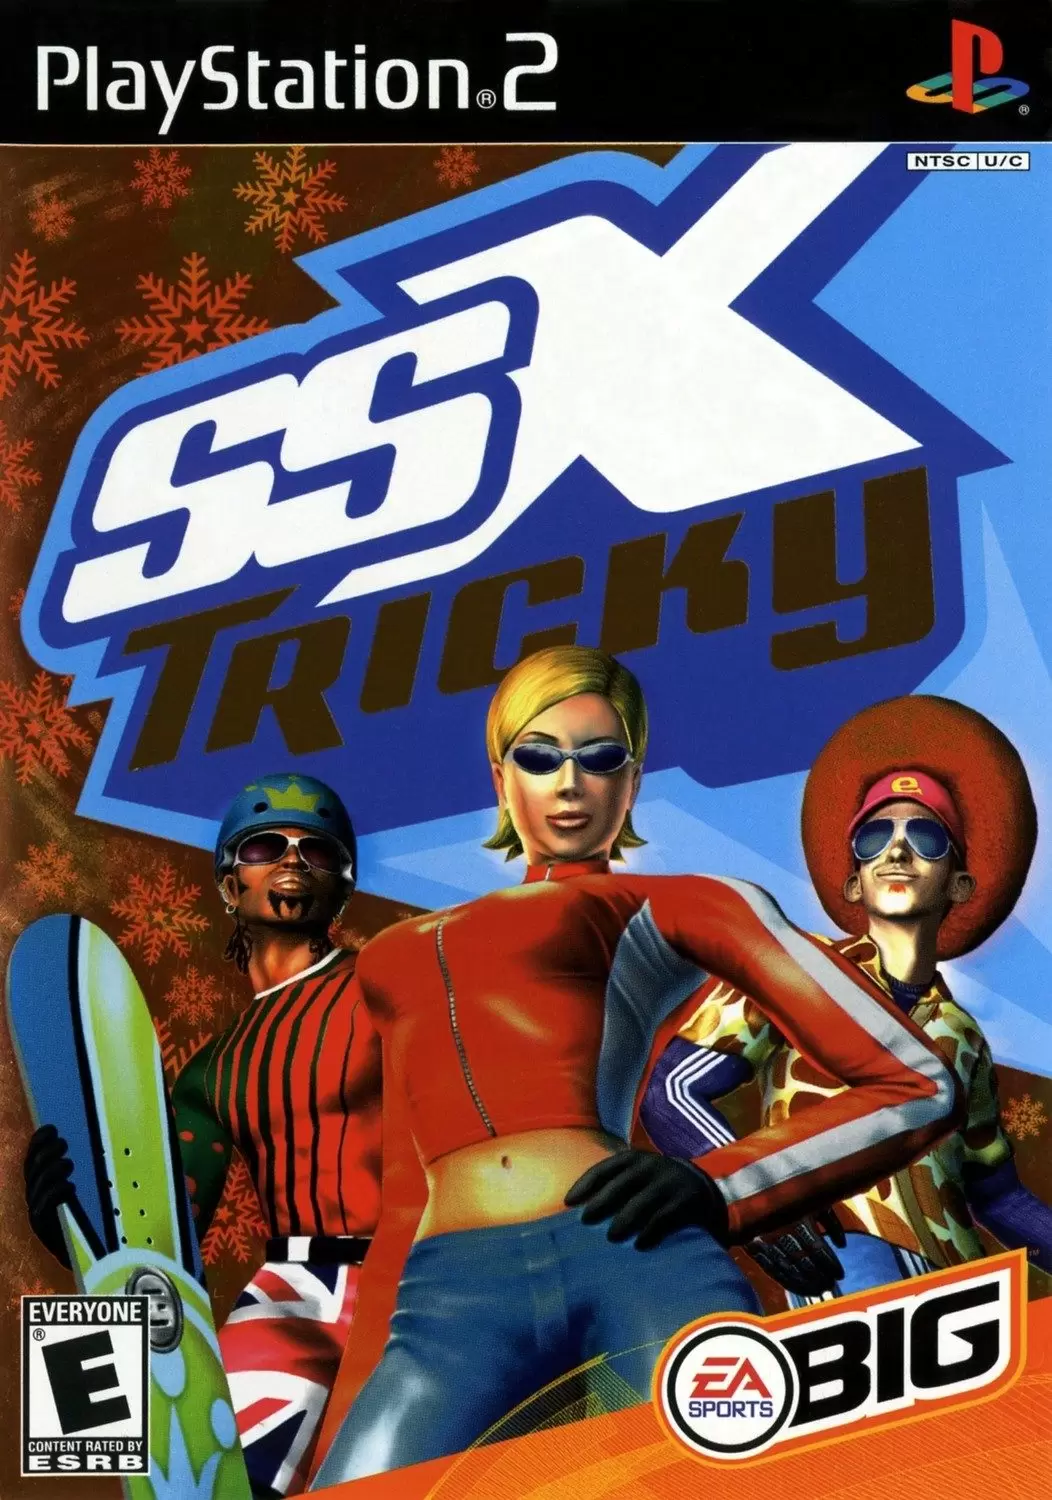 PS2 Games - SSX Tricky